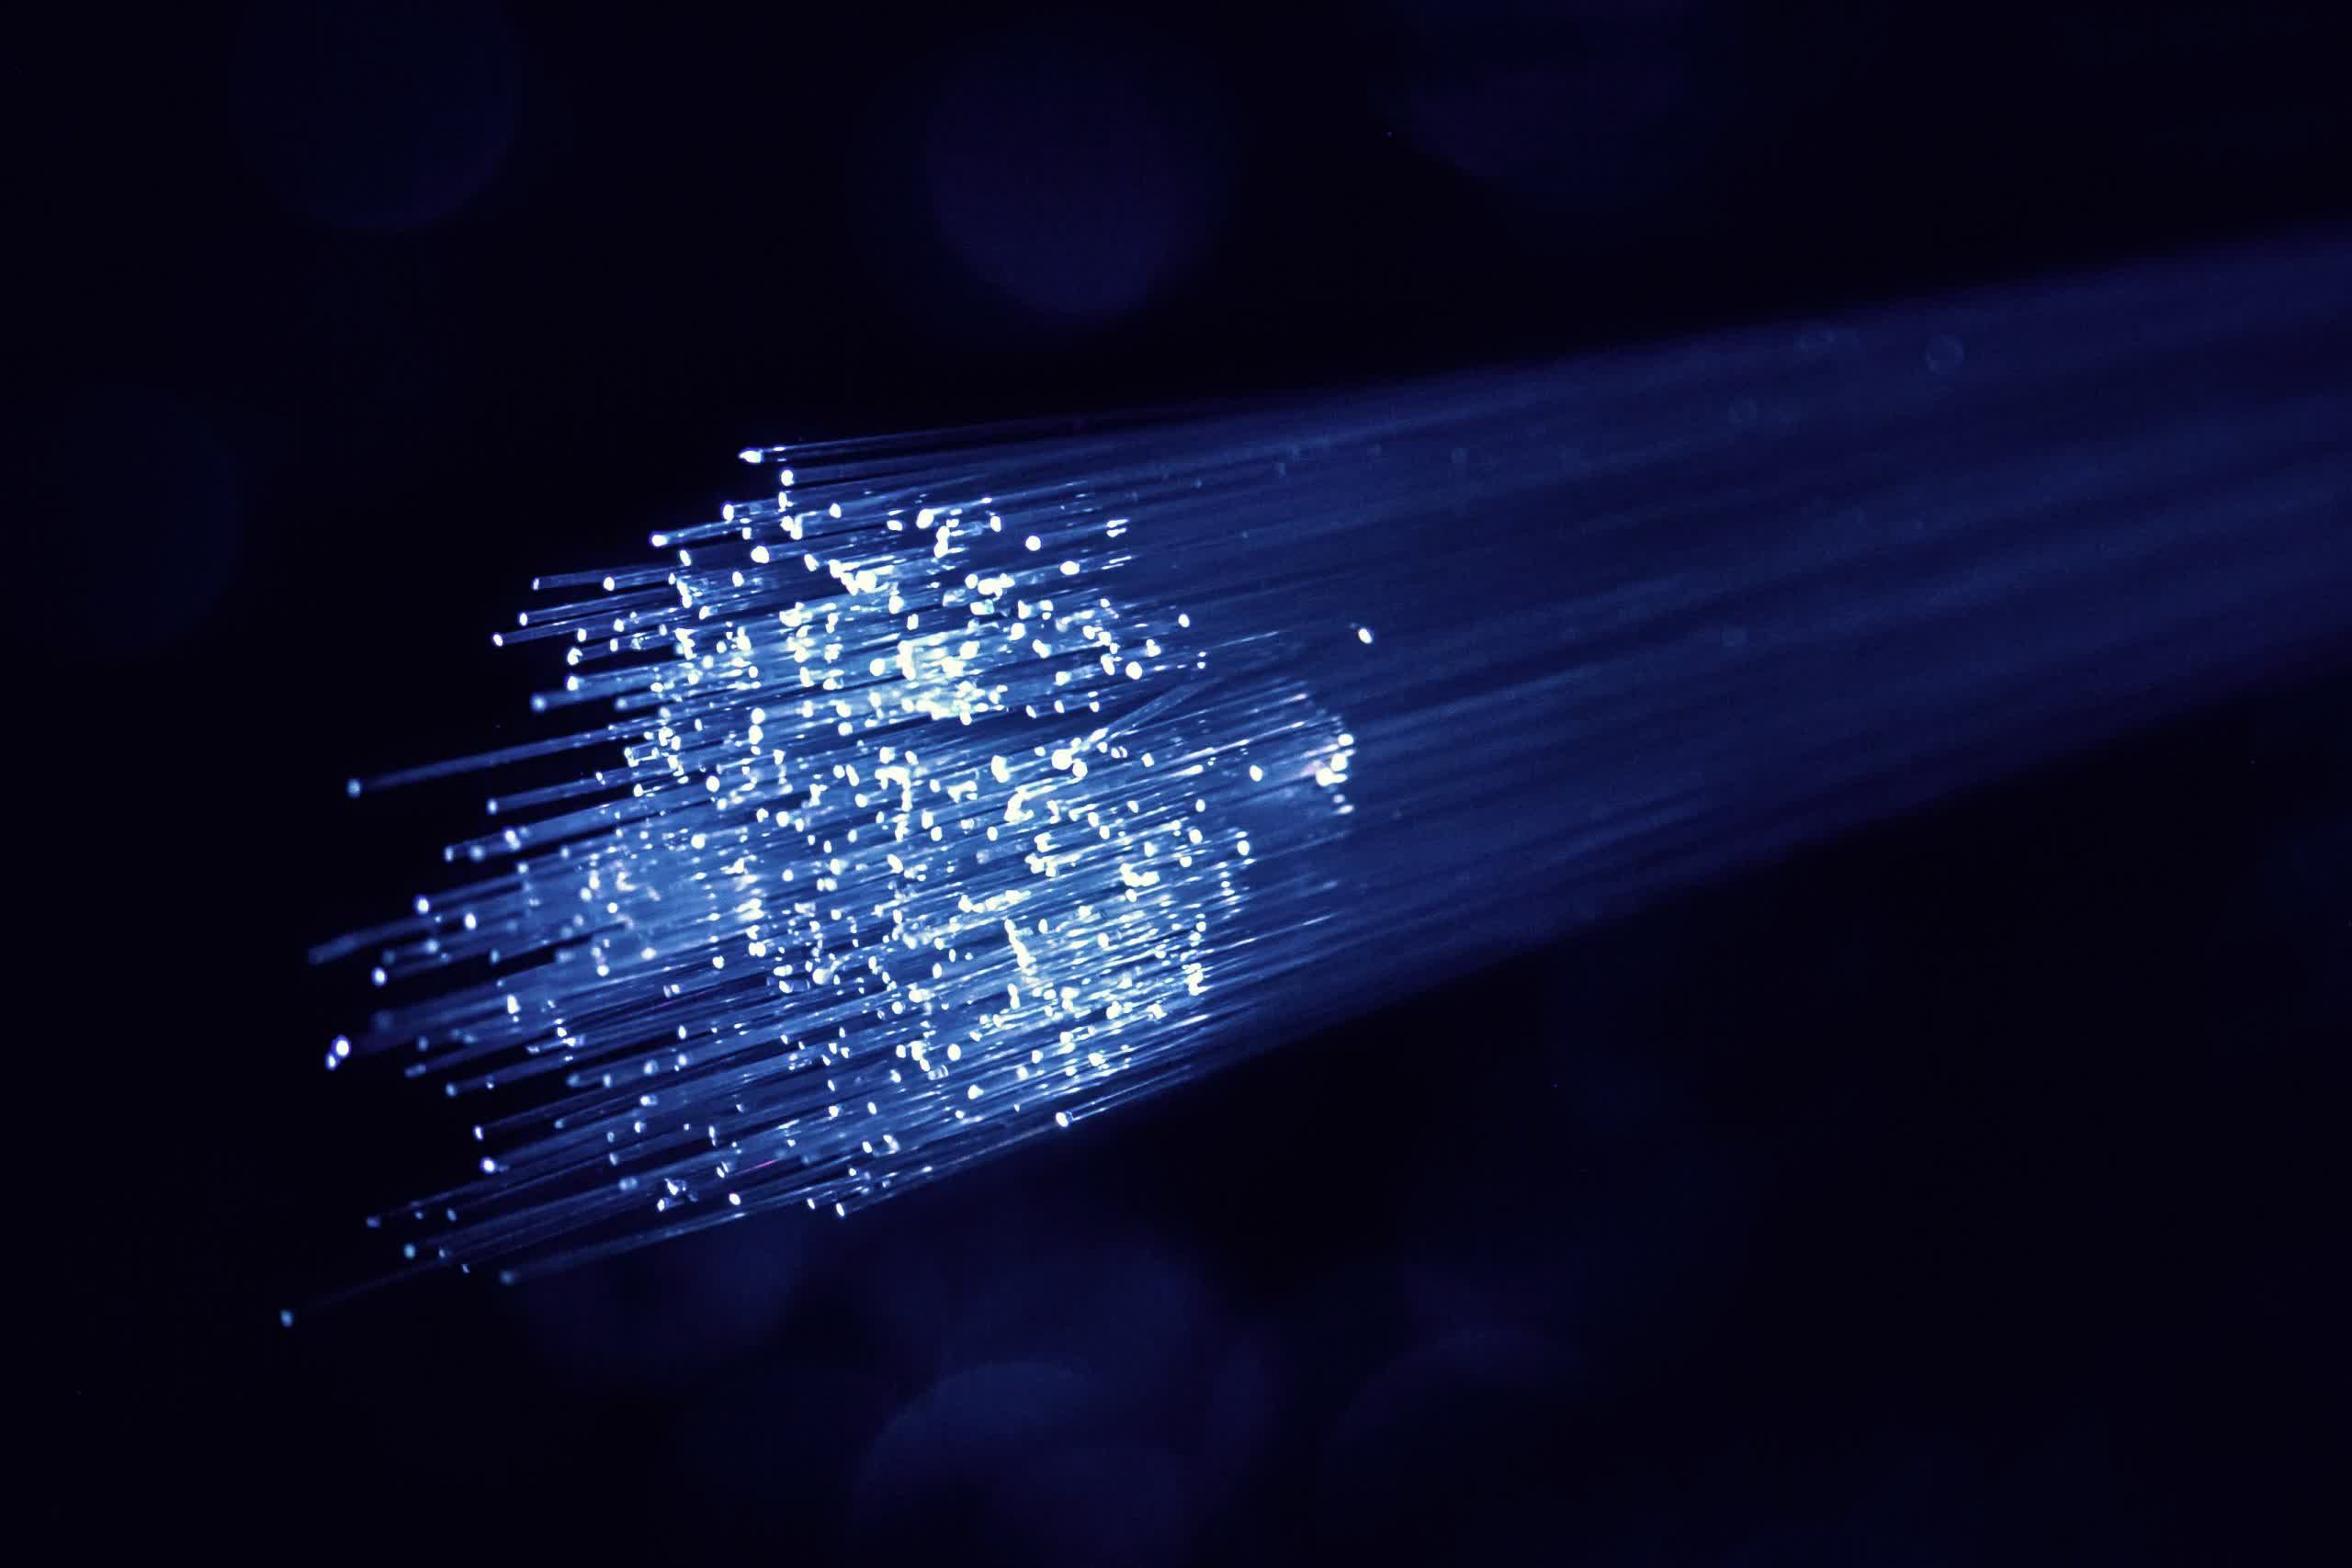 Japan researchers break another data speed record with 1.02 petabits per second fiber optic transfer